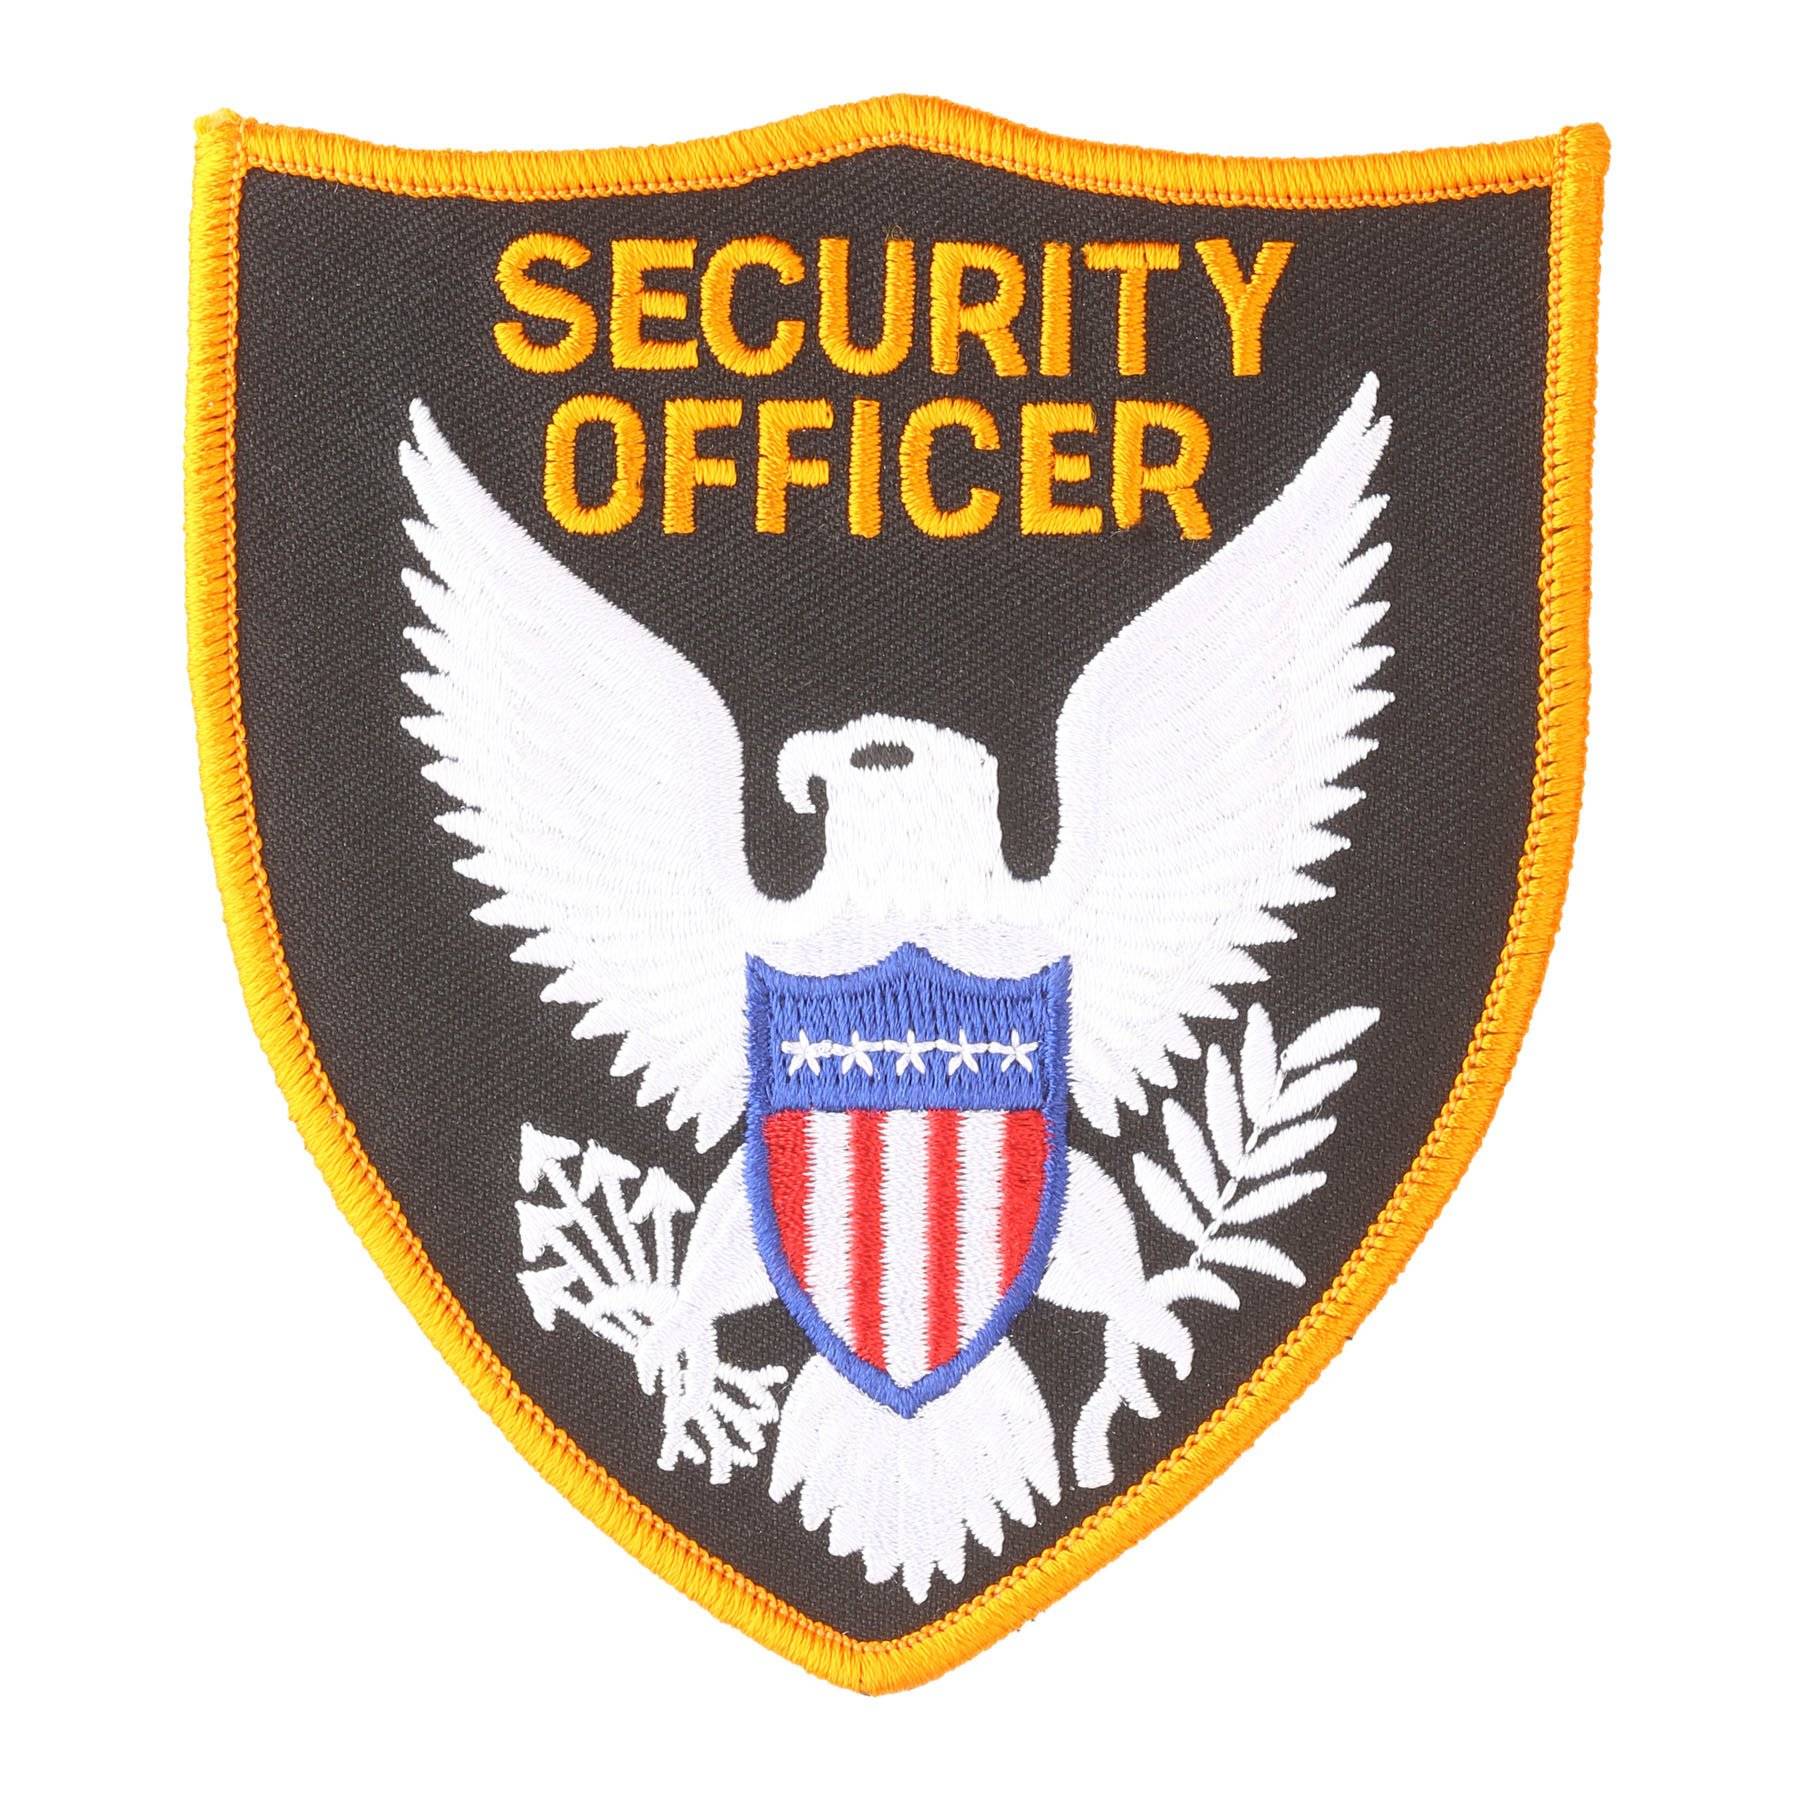 HERO'S PRIDE SECURITY OFFICER PATCH